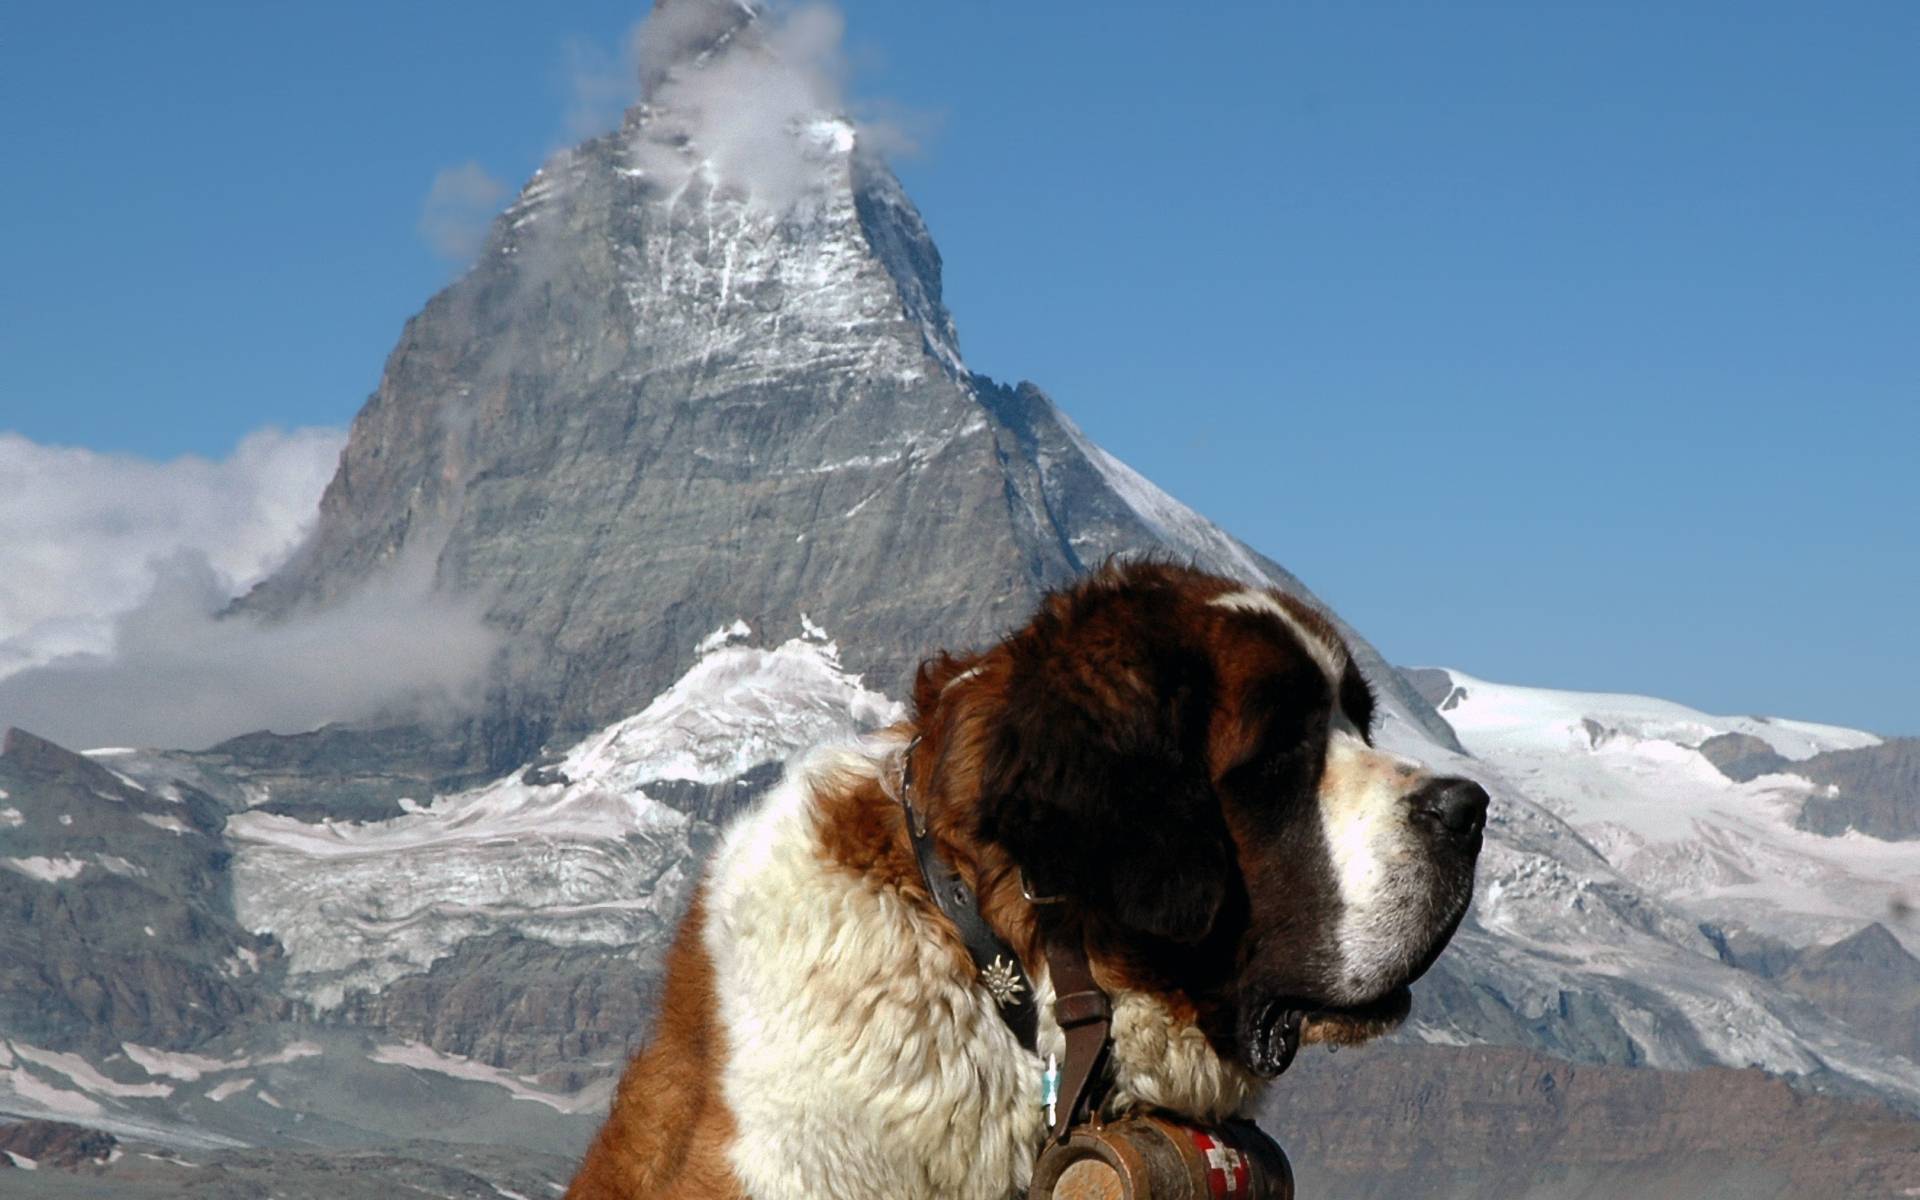 St. Bernard dog wallpaper and image, picture, photo